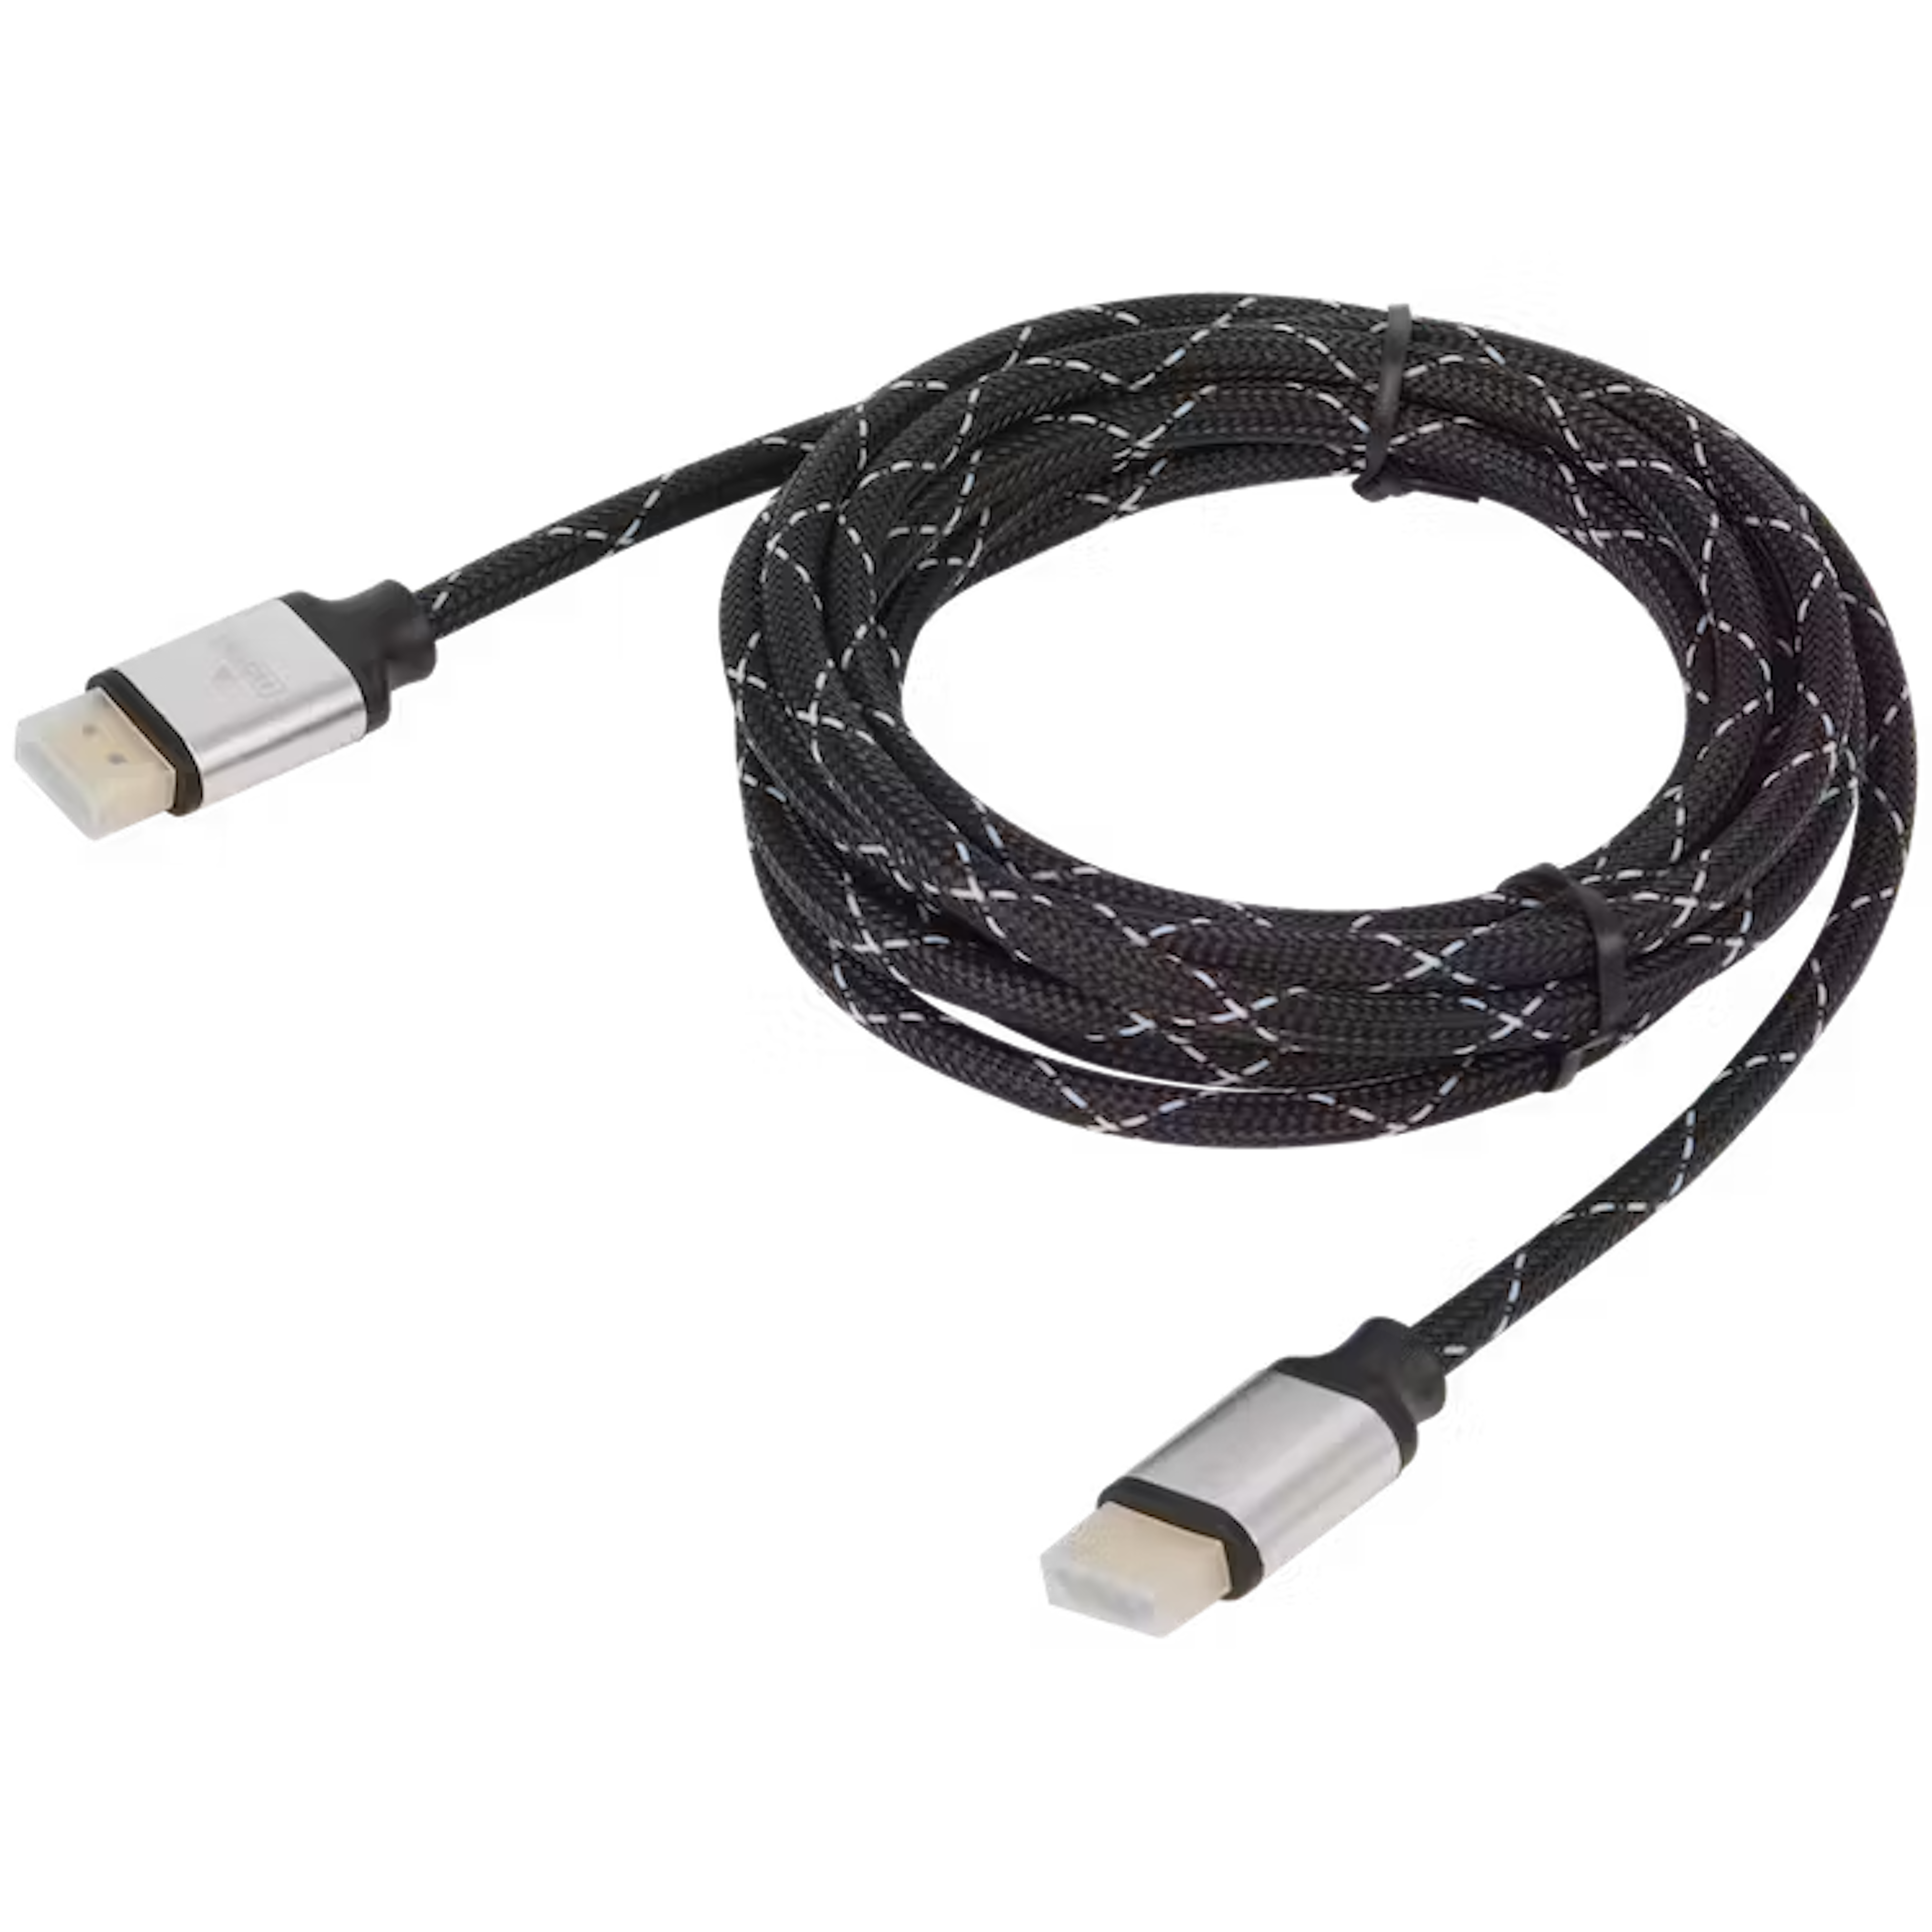 HDMI cable 3 meters